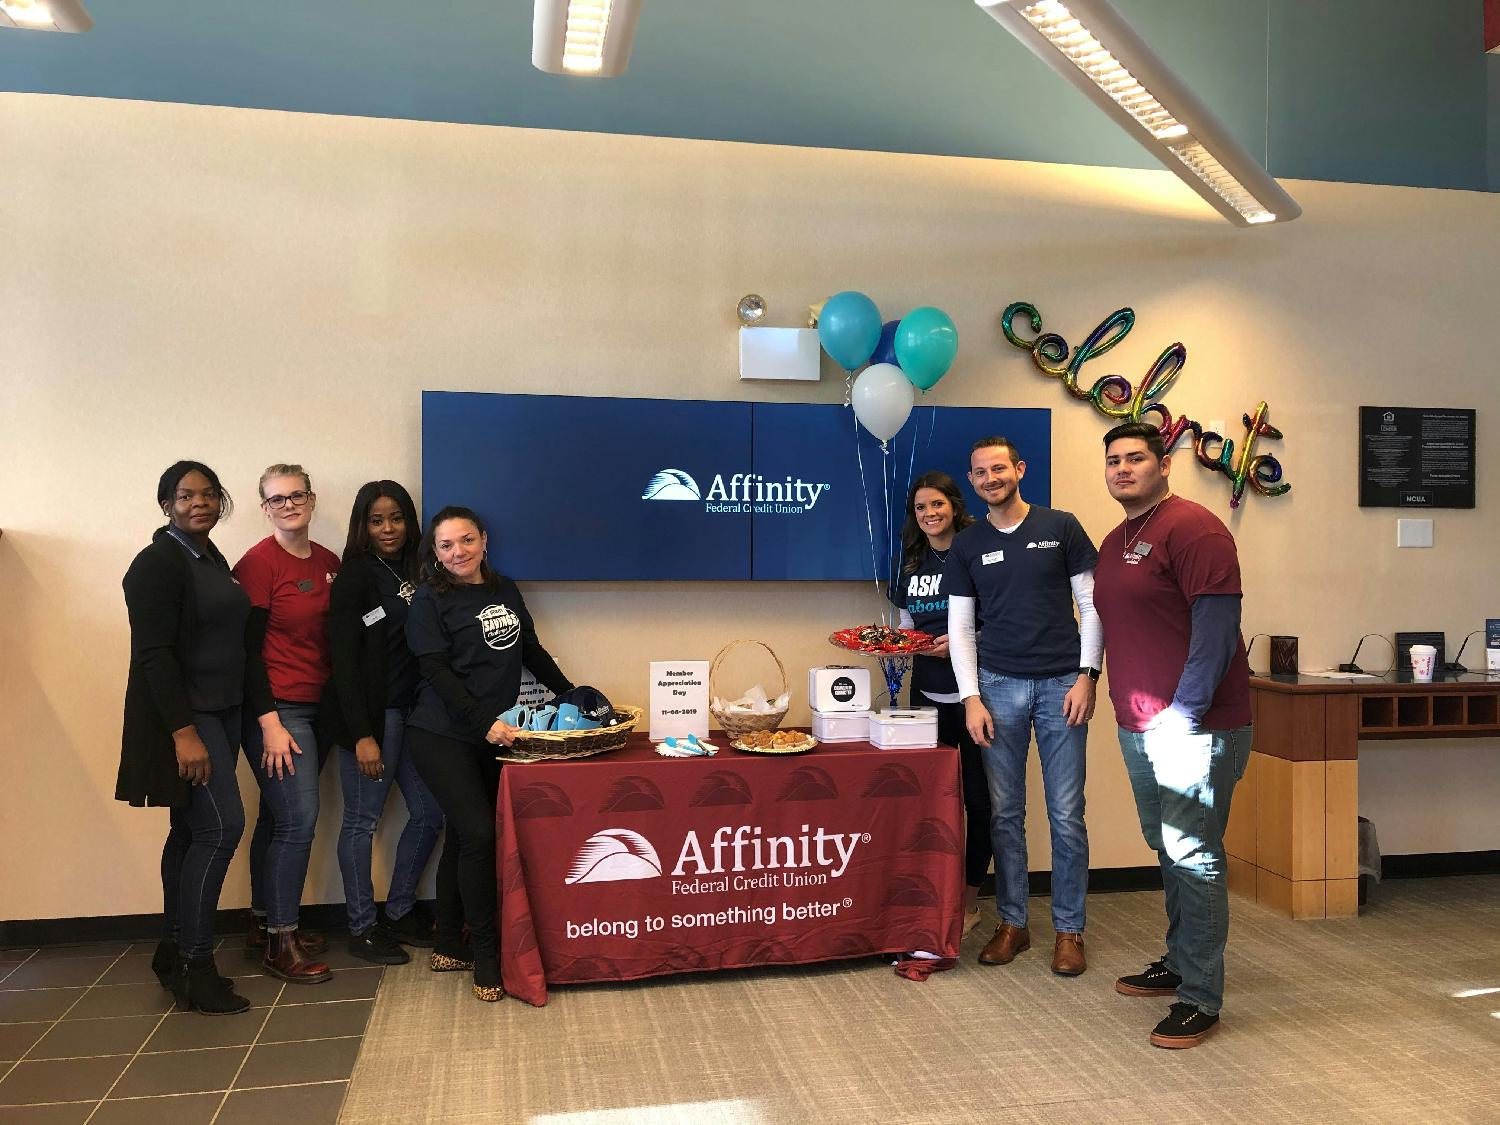 Affinity celebrates Member Appreciation month in branches to thank members for being a part of our community connected